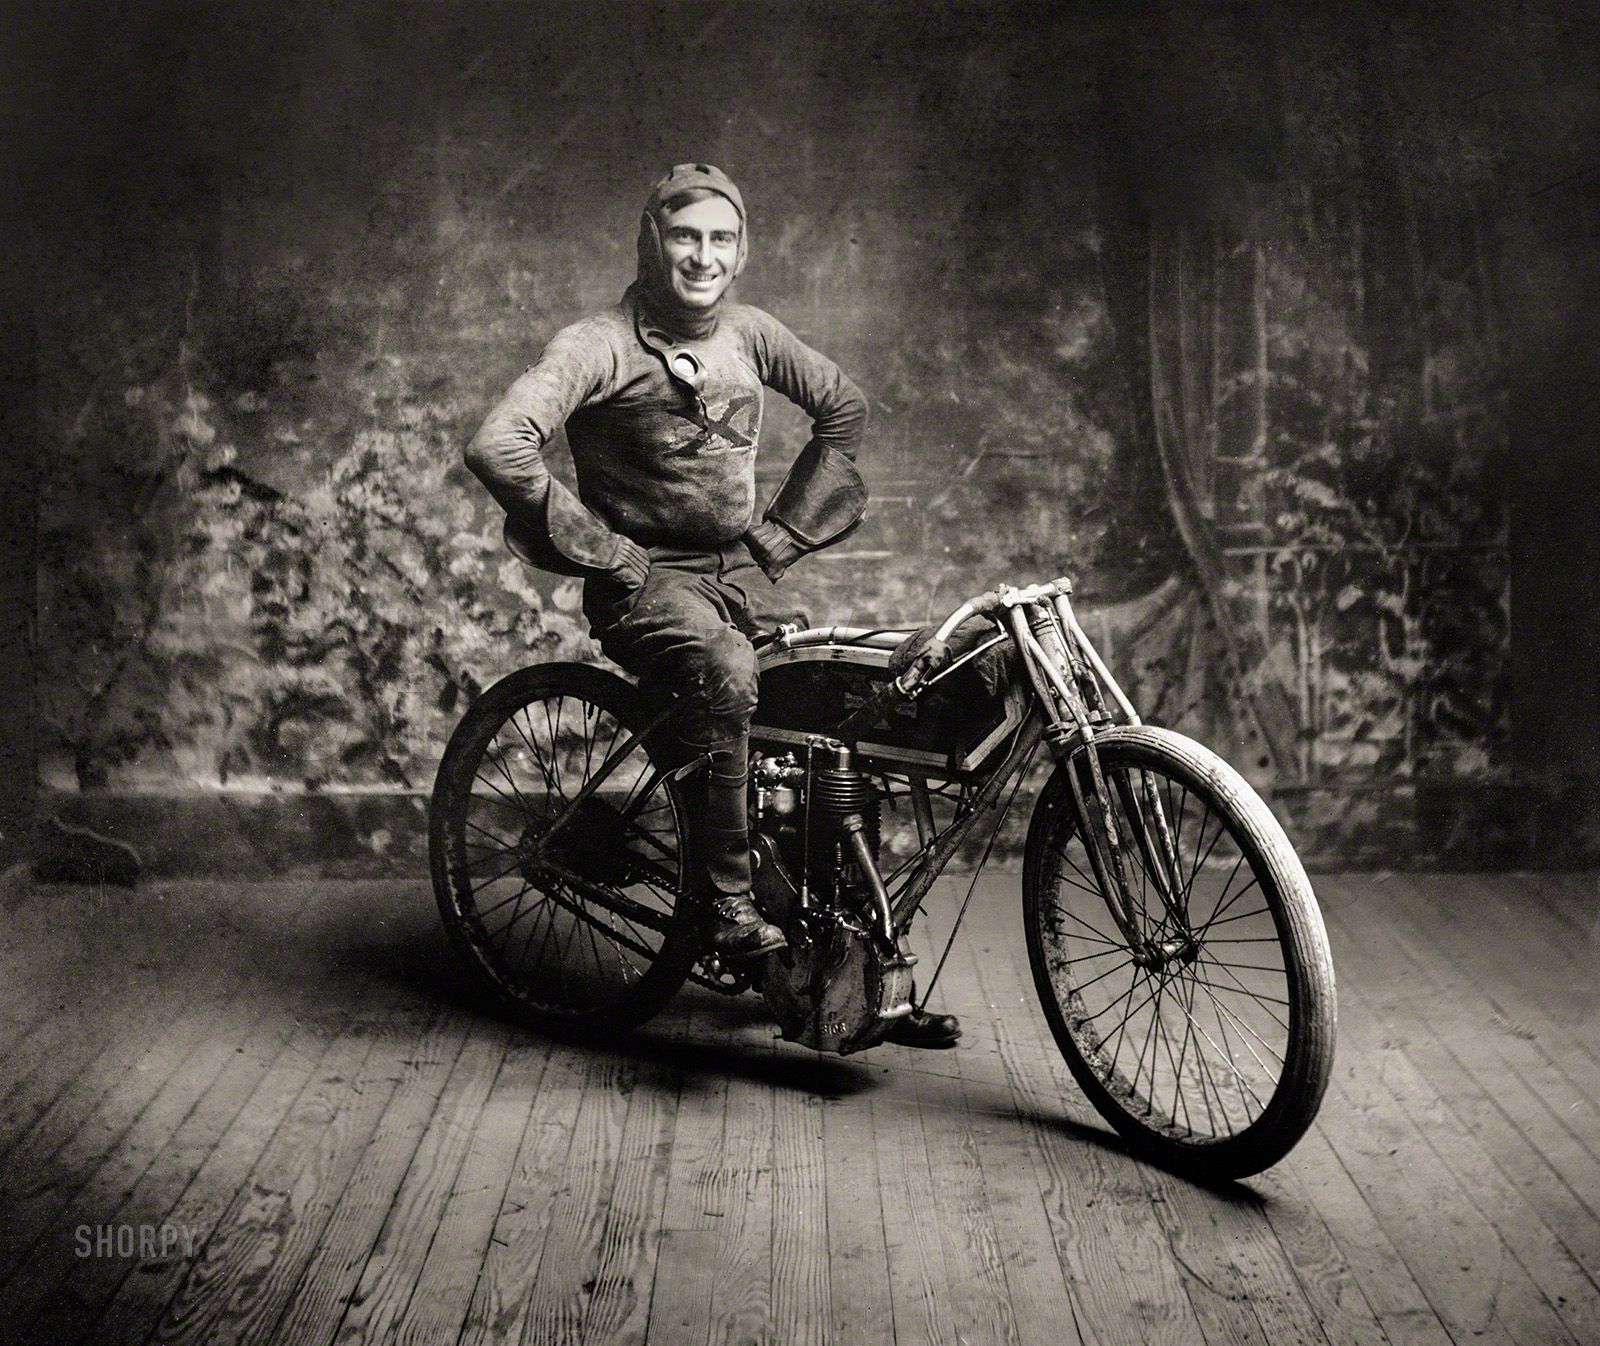 "Ray Weishaar, winner of 100-mile race at Norton, Kansas. October 22, 1914. Time 2 hr. 1½ min. World record." Lawrence Ray Weishaar (1890-1924), the "Kansas Cyclone" and rider for the Harley-Davison "Wrecking Crew," died at the age of 33 after crashing his bike during a race in Los Angeles. View full size.